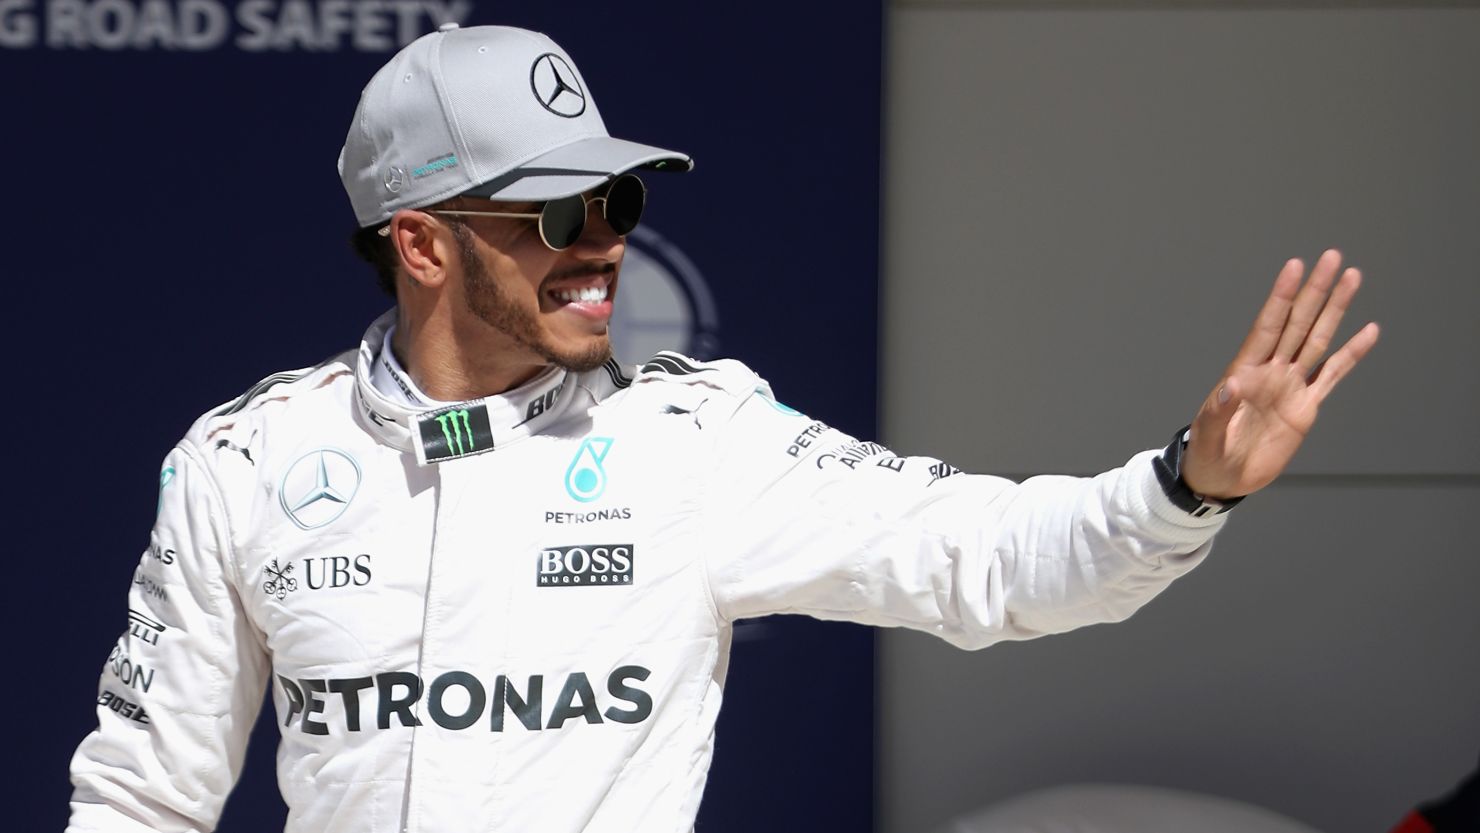 Lewis Hamilton waves after qualifying in pole position for the United States Grand Prix at Circuit of The Americas in Austin, Texas.